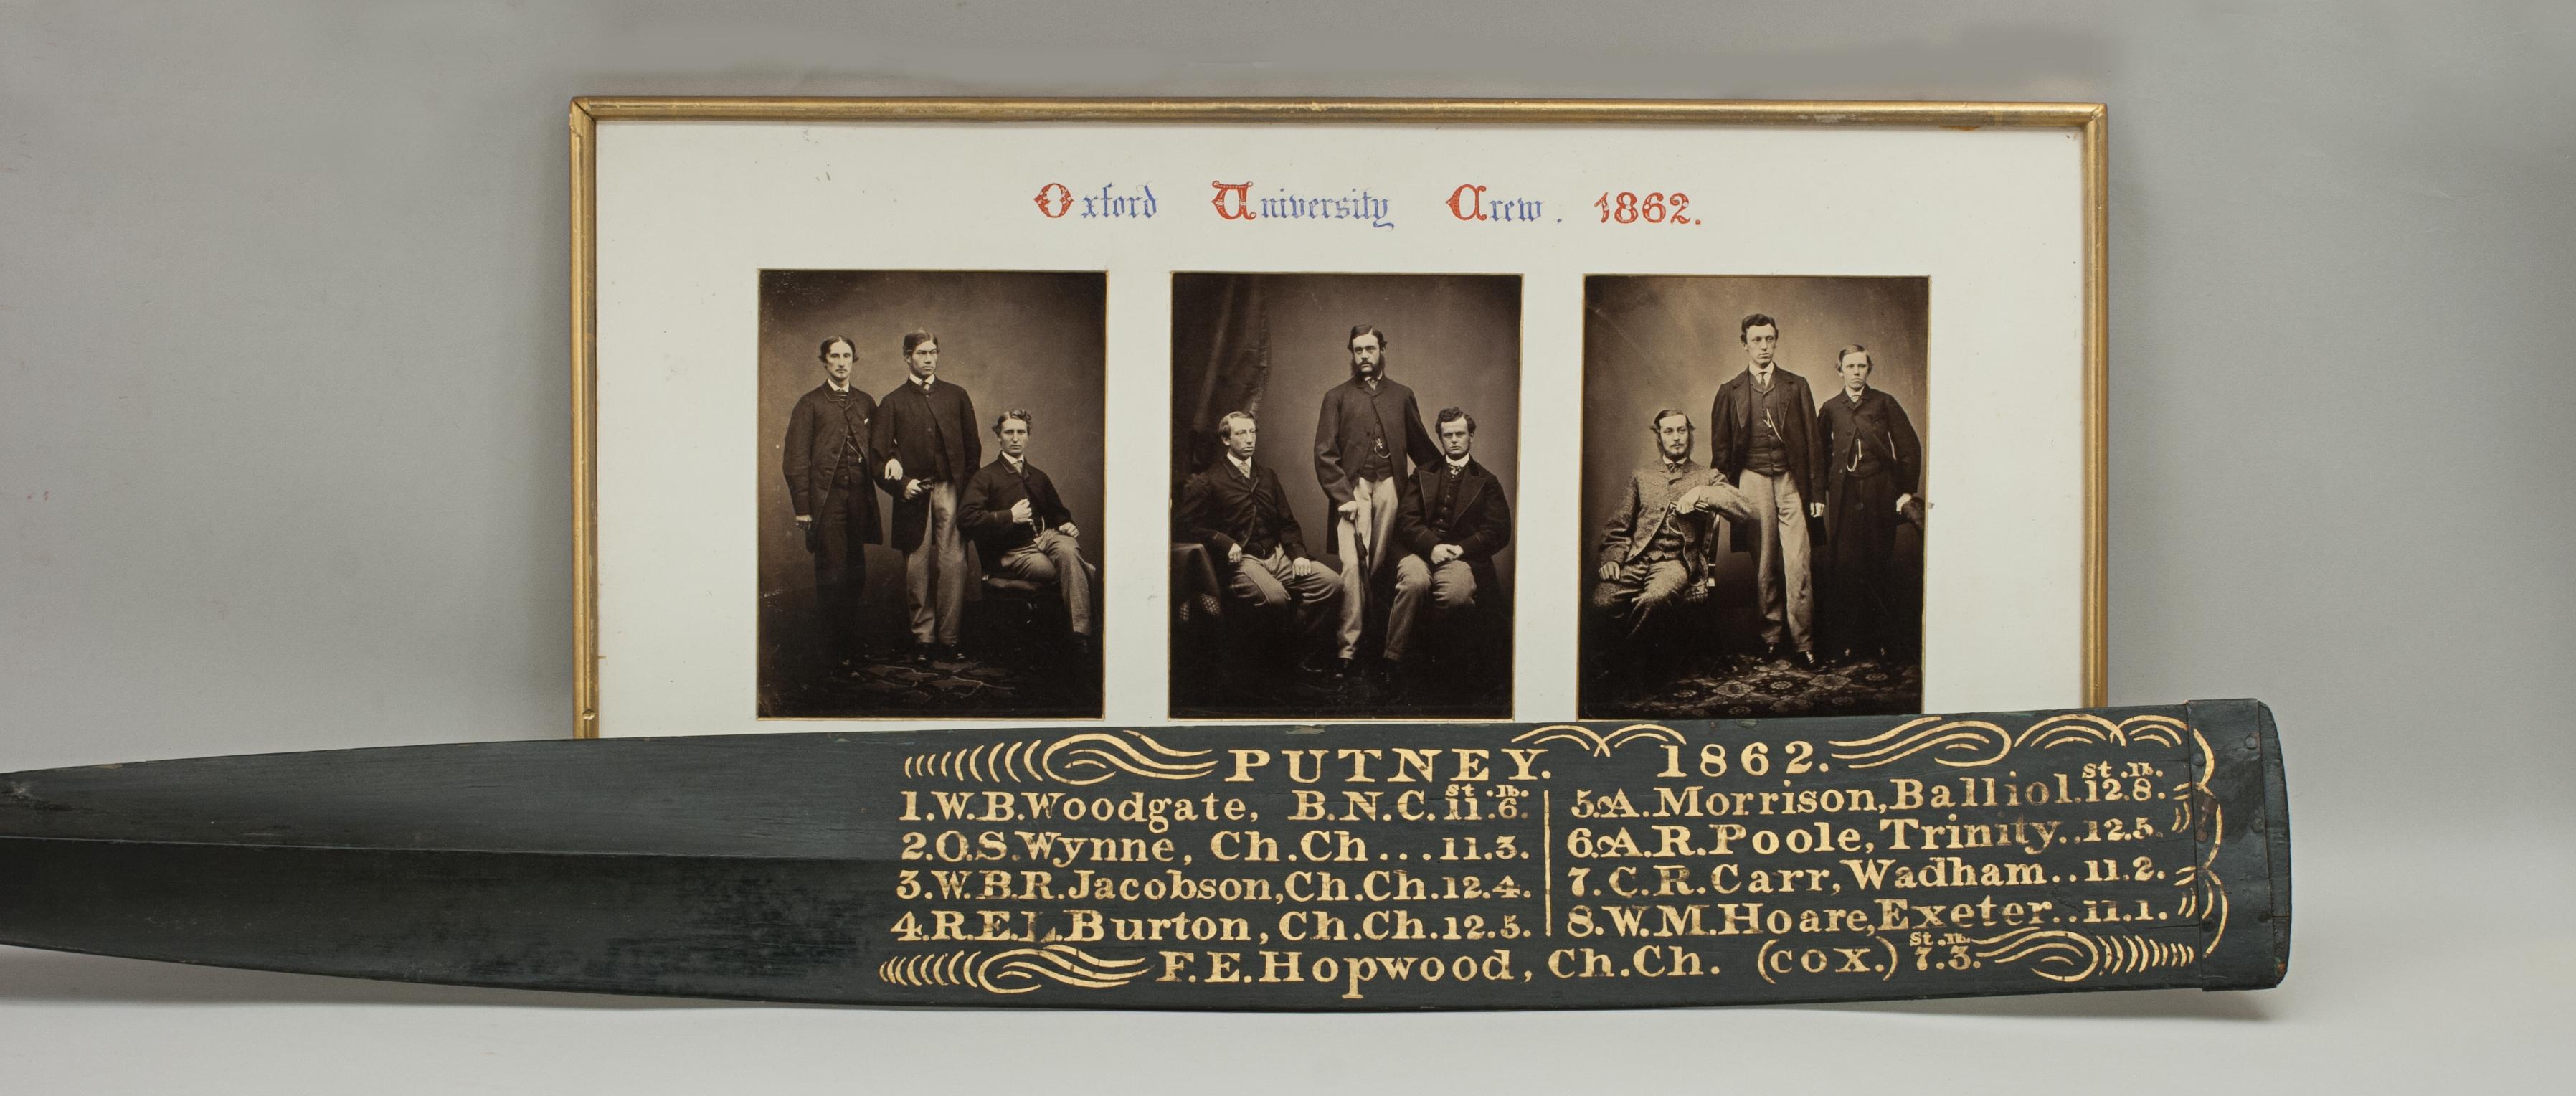 Oxford University Boat Race Rowing Oar 1862, with Photographs. Oxford Cambridge 1